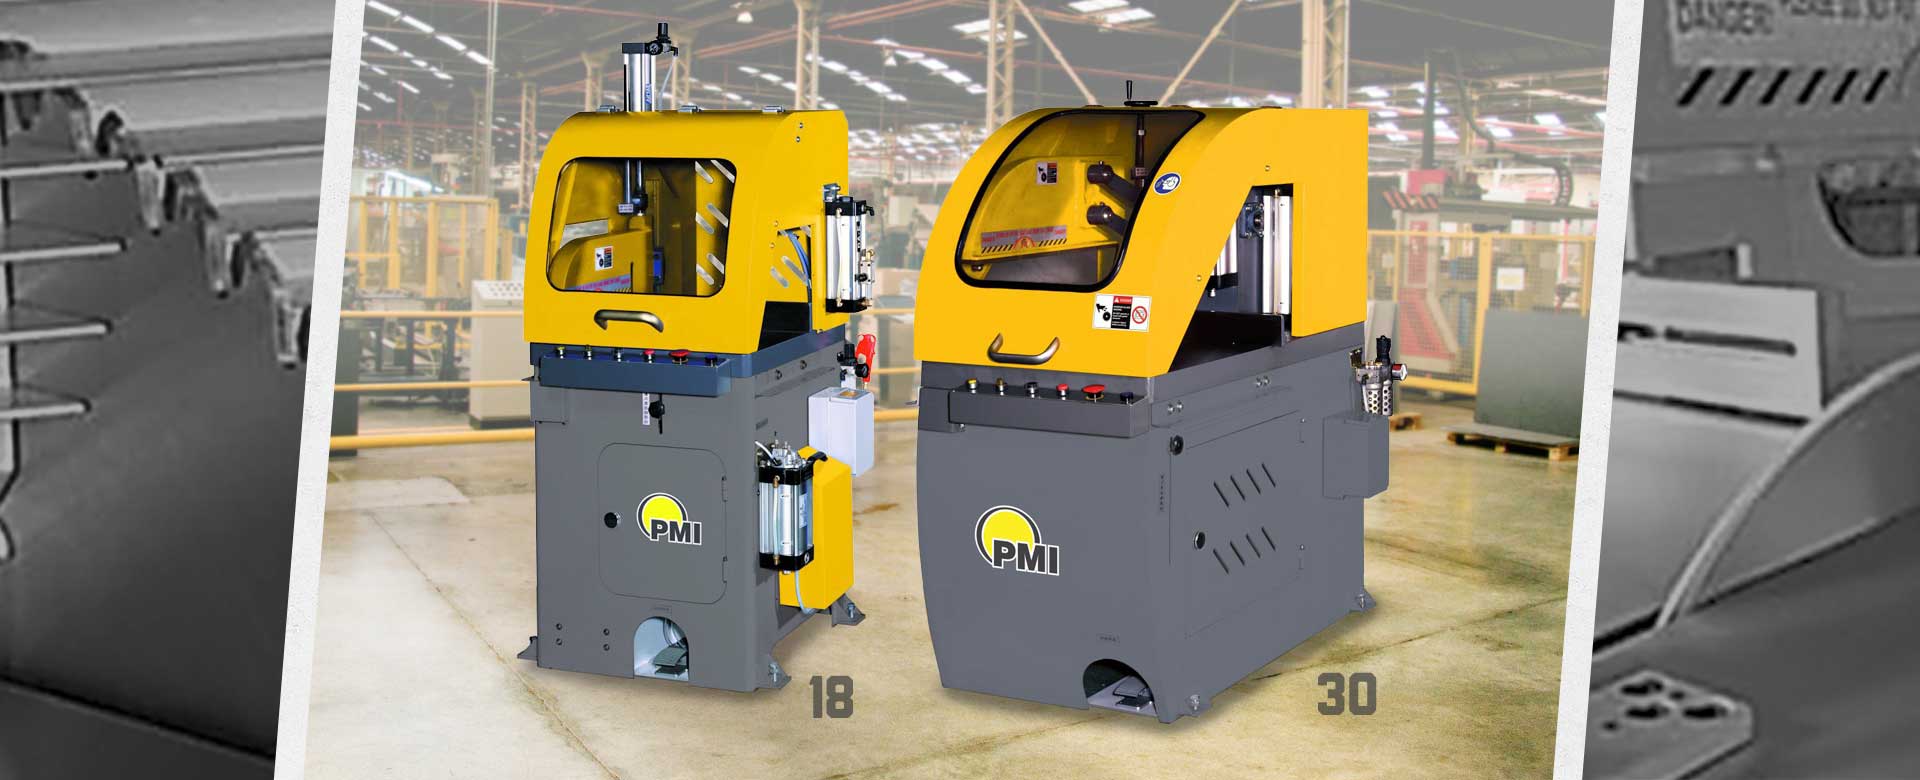 Gulf States Saw & Machine Co. offers Semi-automatic Circular Upcut Saws such as the PMI 18 and 30, from PMI in multiple models and configurations.